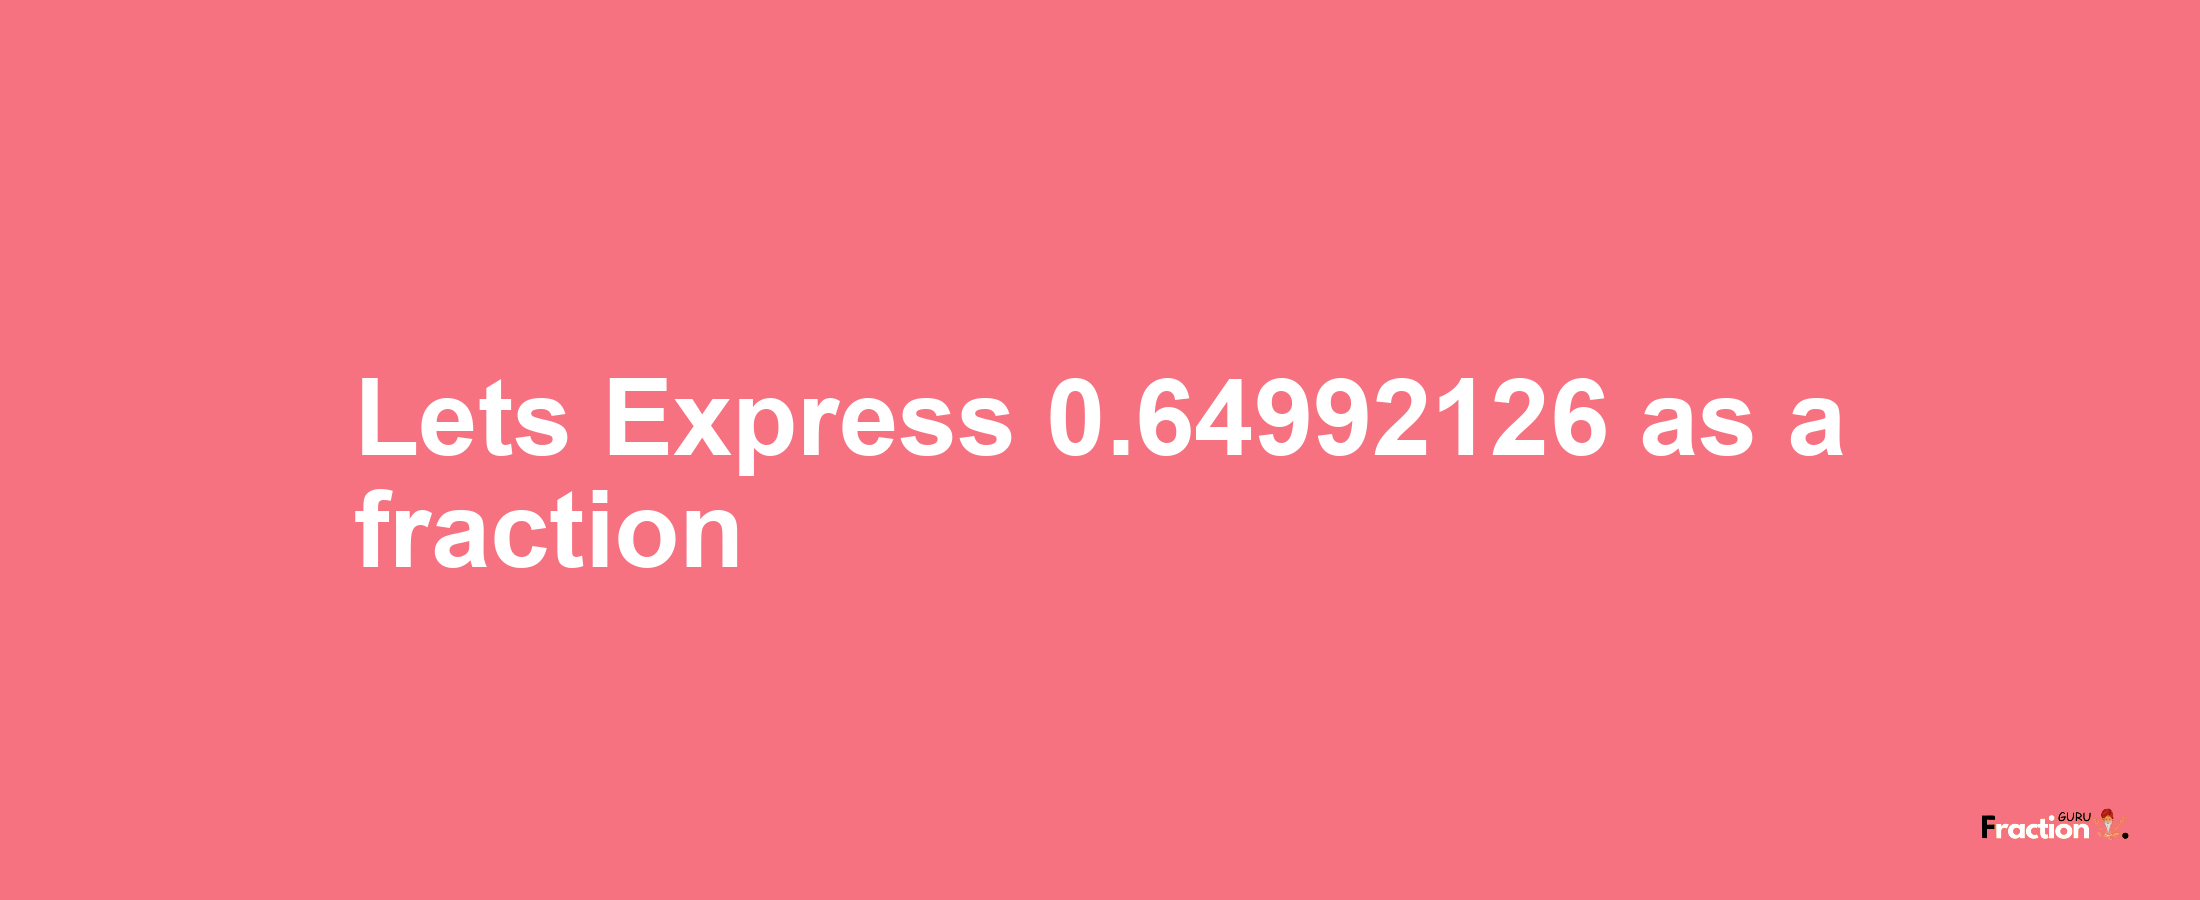 Lets Express 0.64992126 as afraction